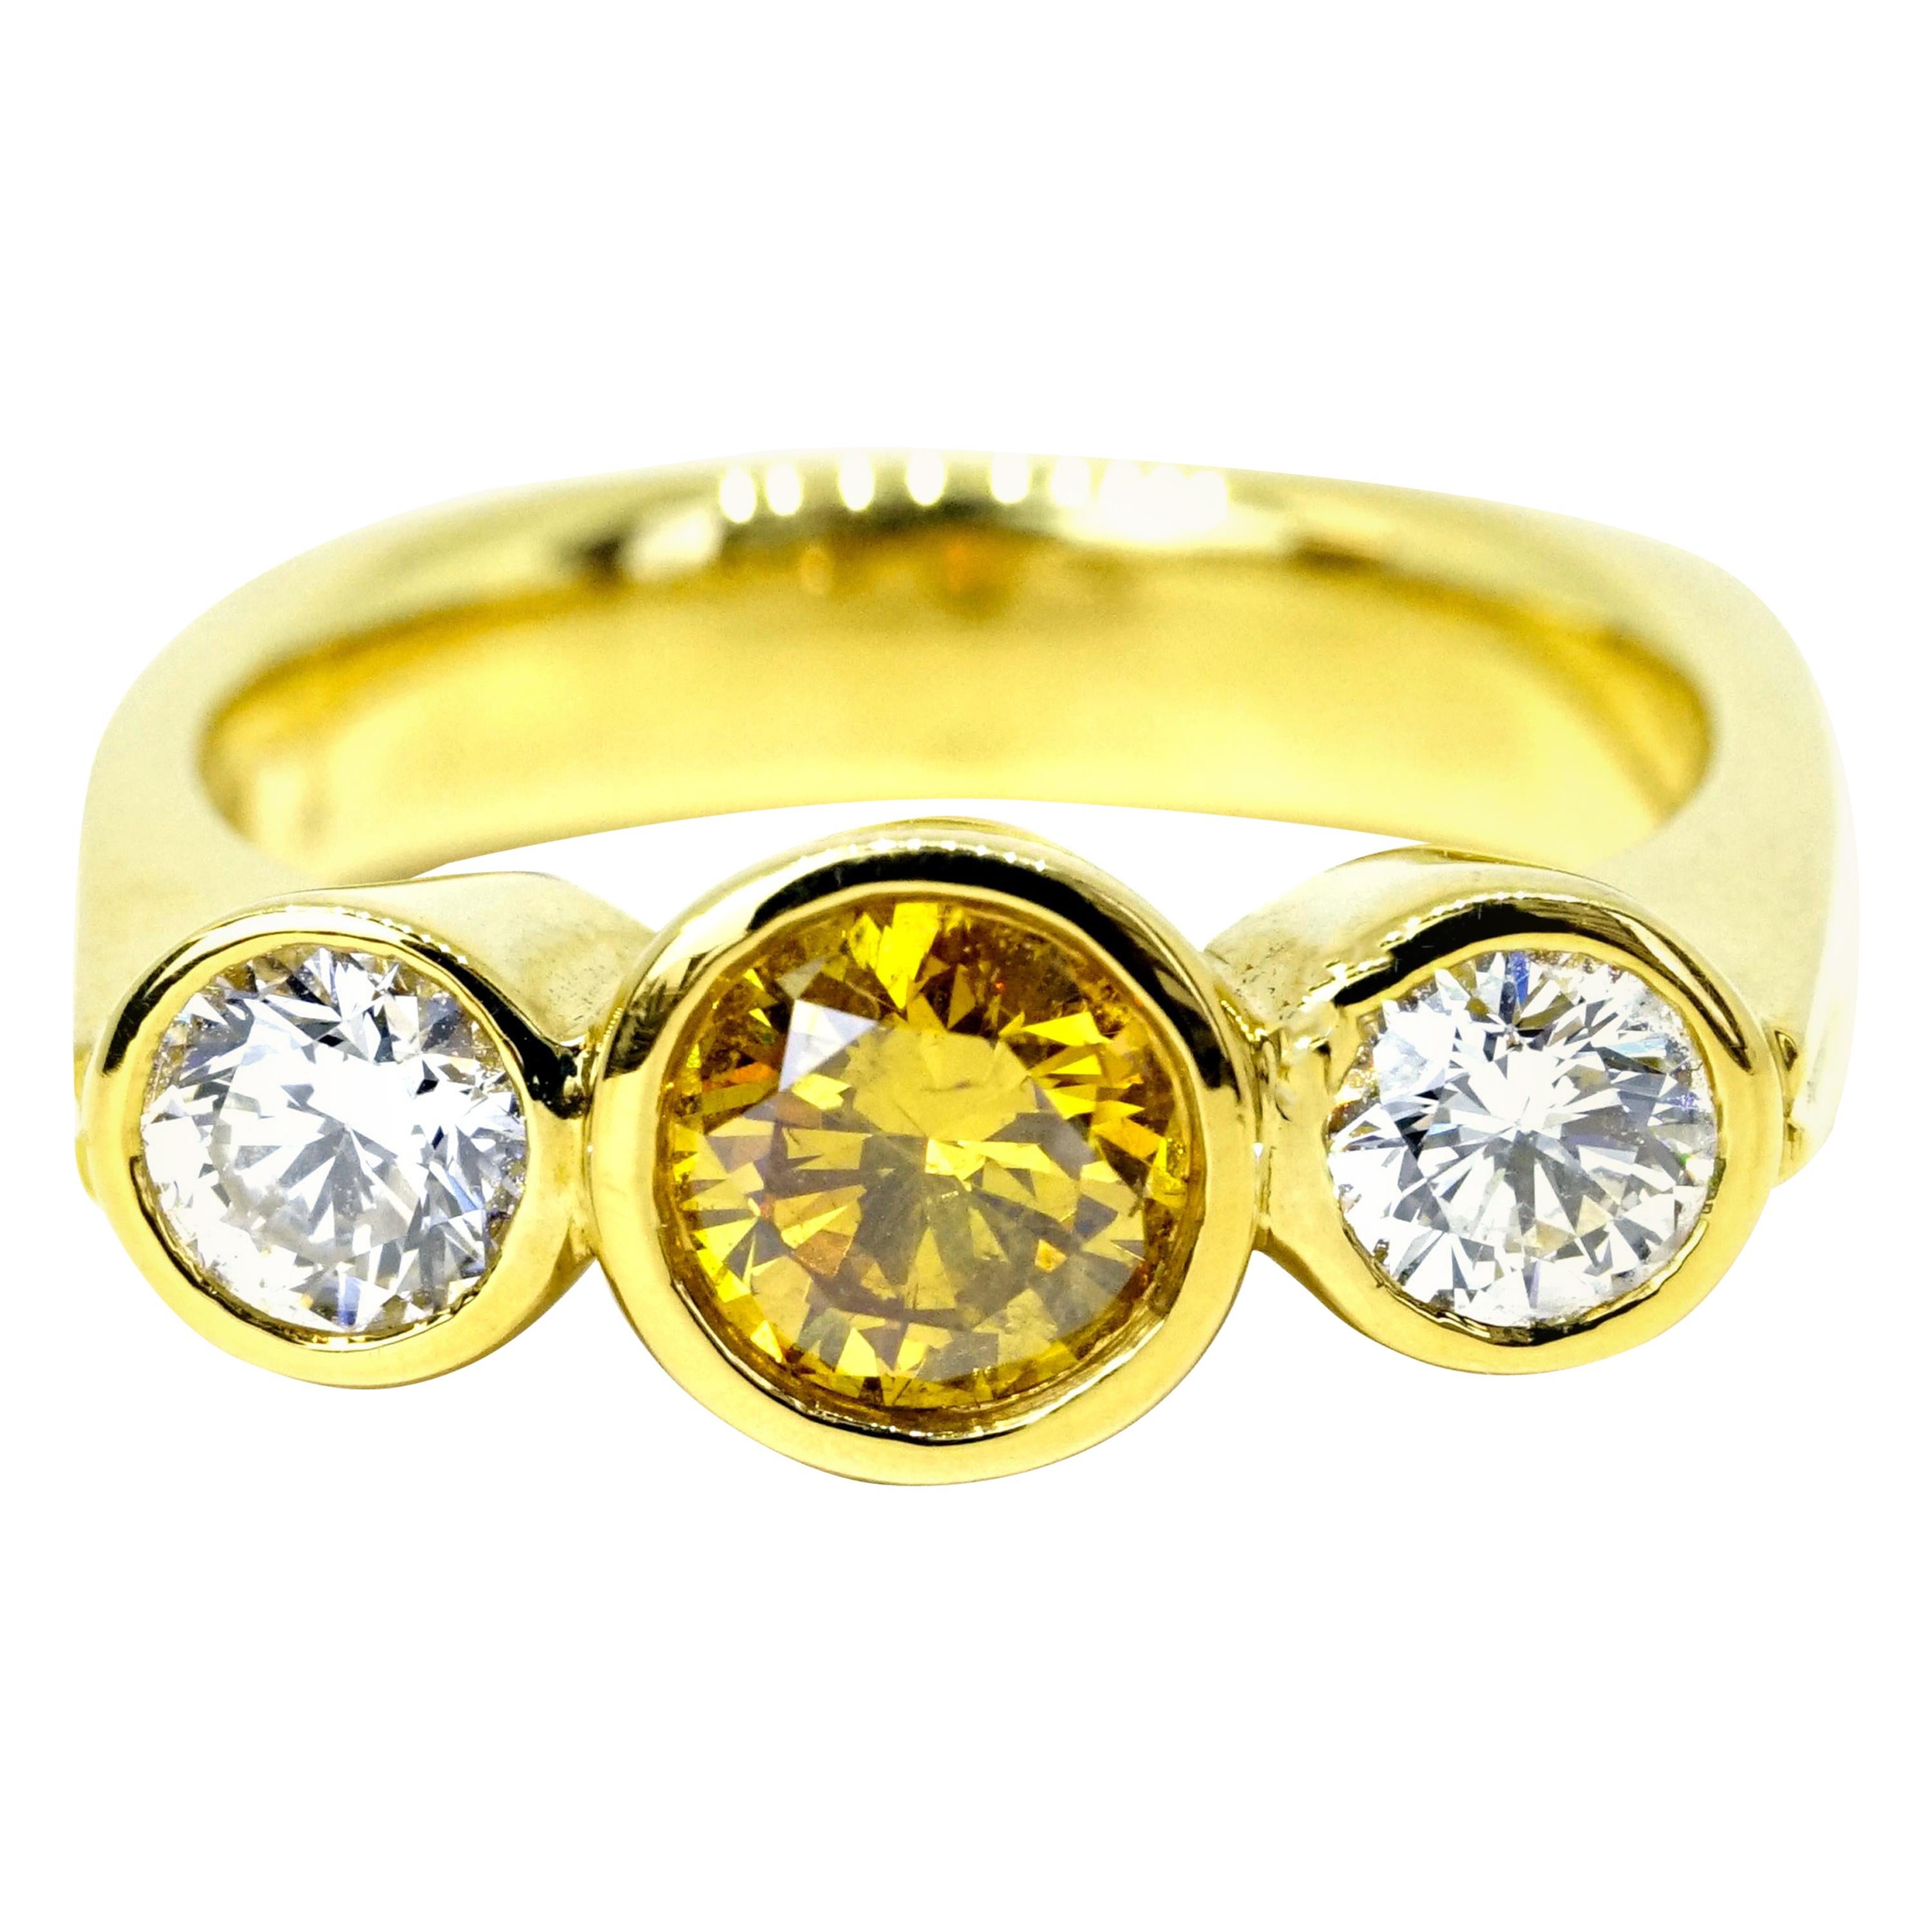 Hofer Certified 1.34 Carats Fancy "Amber Yellow" Three Stone Ring For Sale